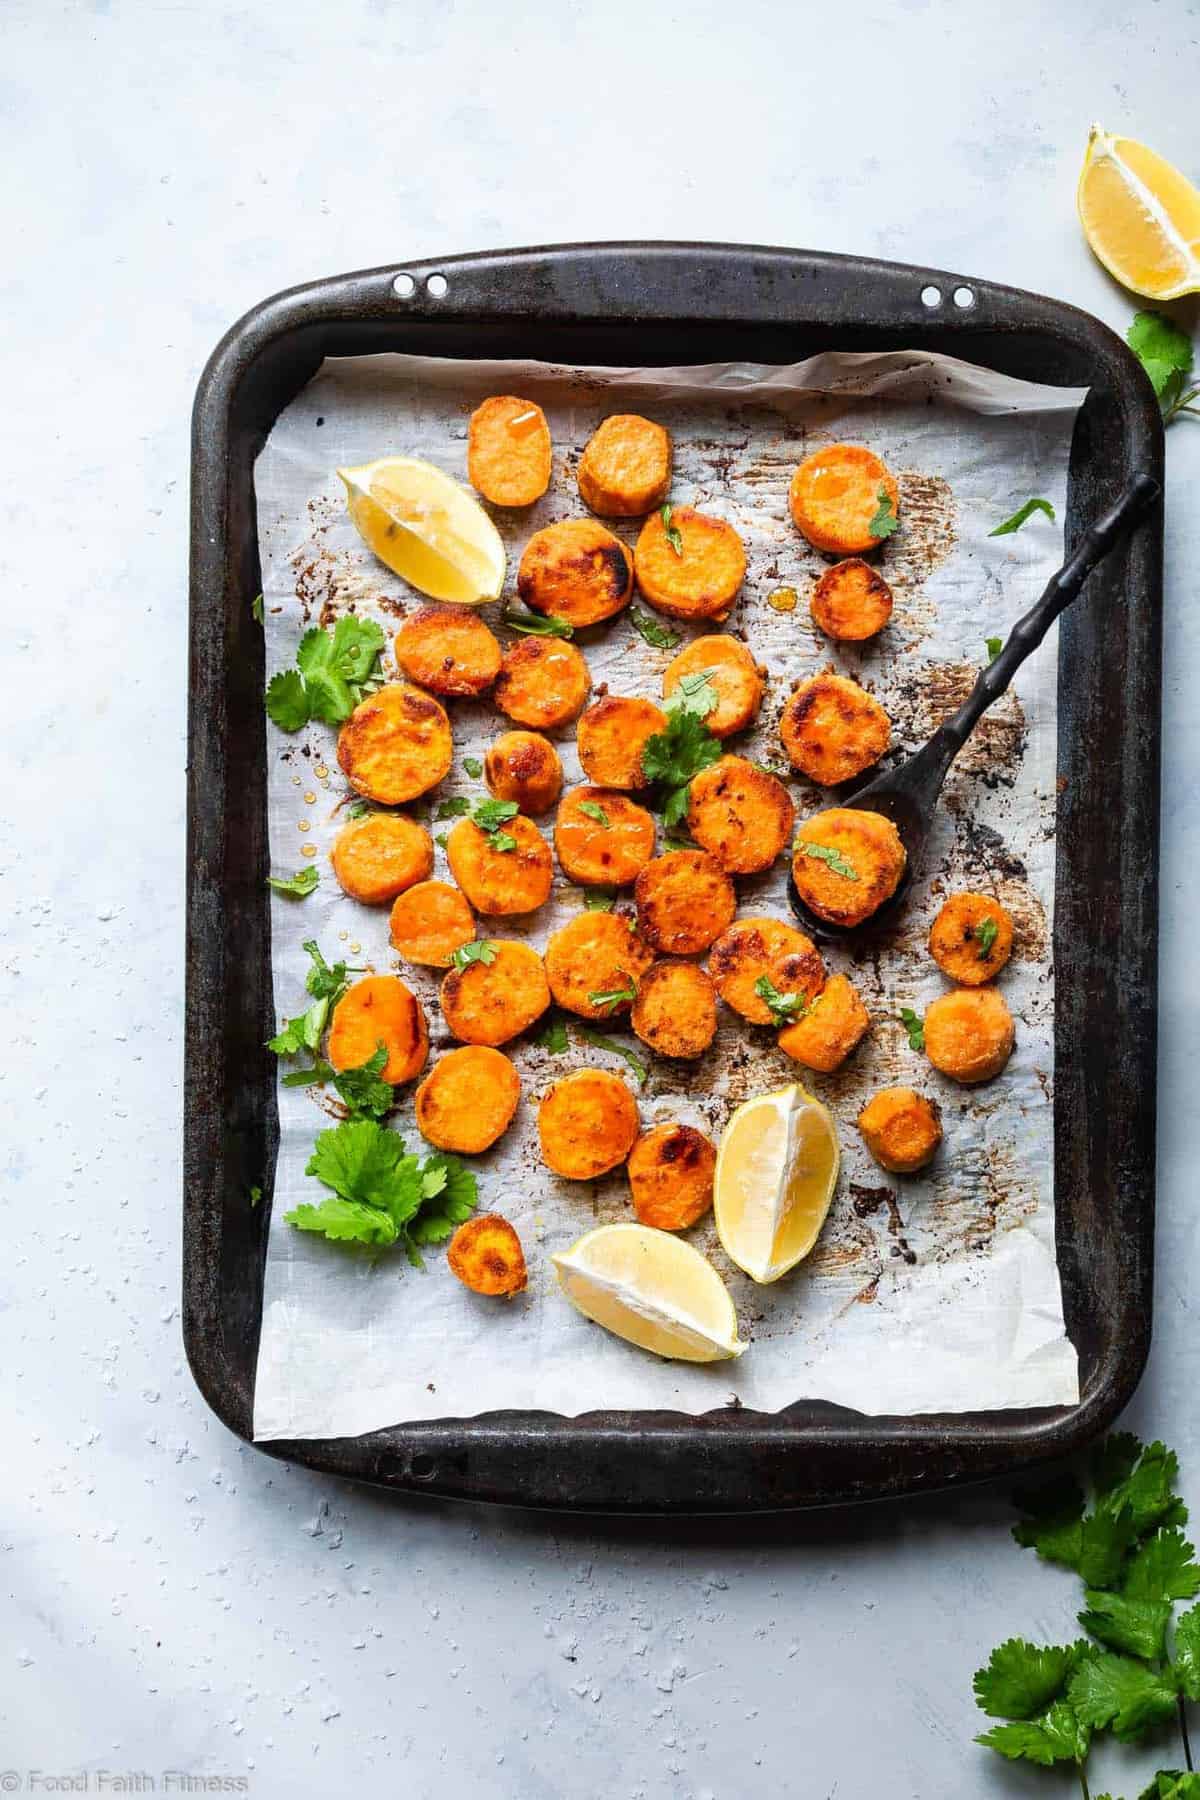 Tahini Maple Roasted Sweet Potatoes - These quick and easy, gluten free Roasted Sweet Potatoes are SO soft, tender and flavorful! A delicious, healthy side dish that everyone will love! | #FoodFaithFitness | #Glutenfree #Paleo #Healthy #Vegetarian #Dairyfree